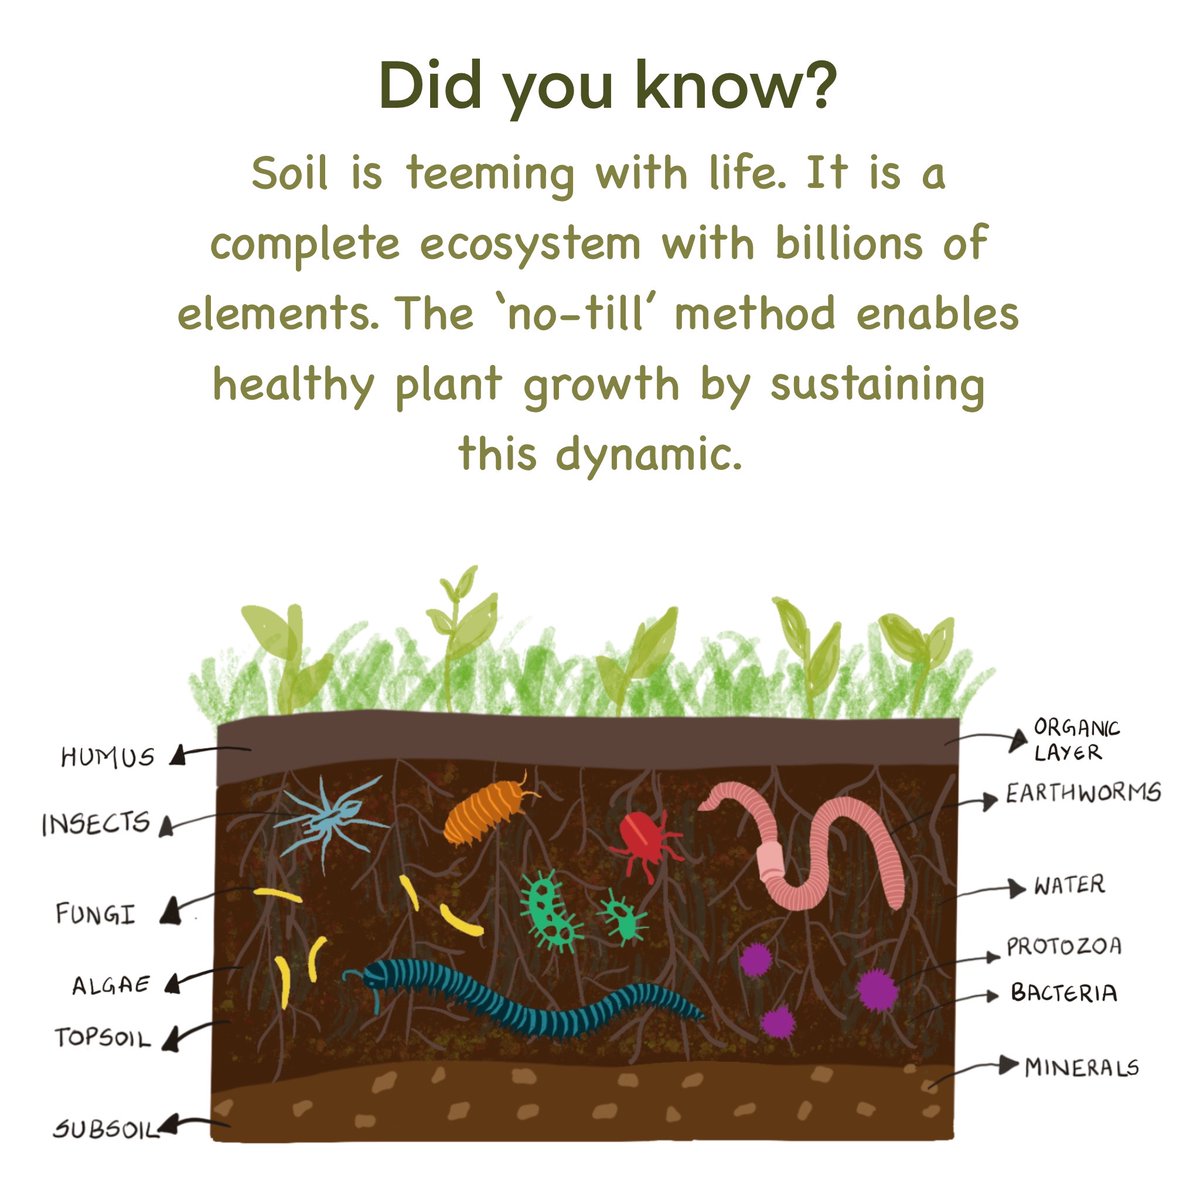 Components of a healthy soil.
#permaculture #organicgardening #growyourown #sustainability #permacultureeducation
#soilhealth
#sustainabilityagriculture #permaculturedesign #soil #ecosystem